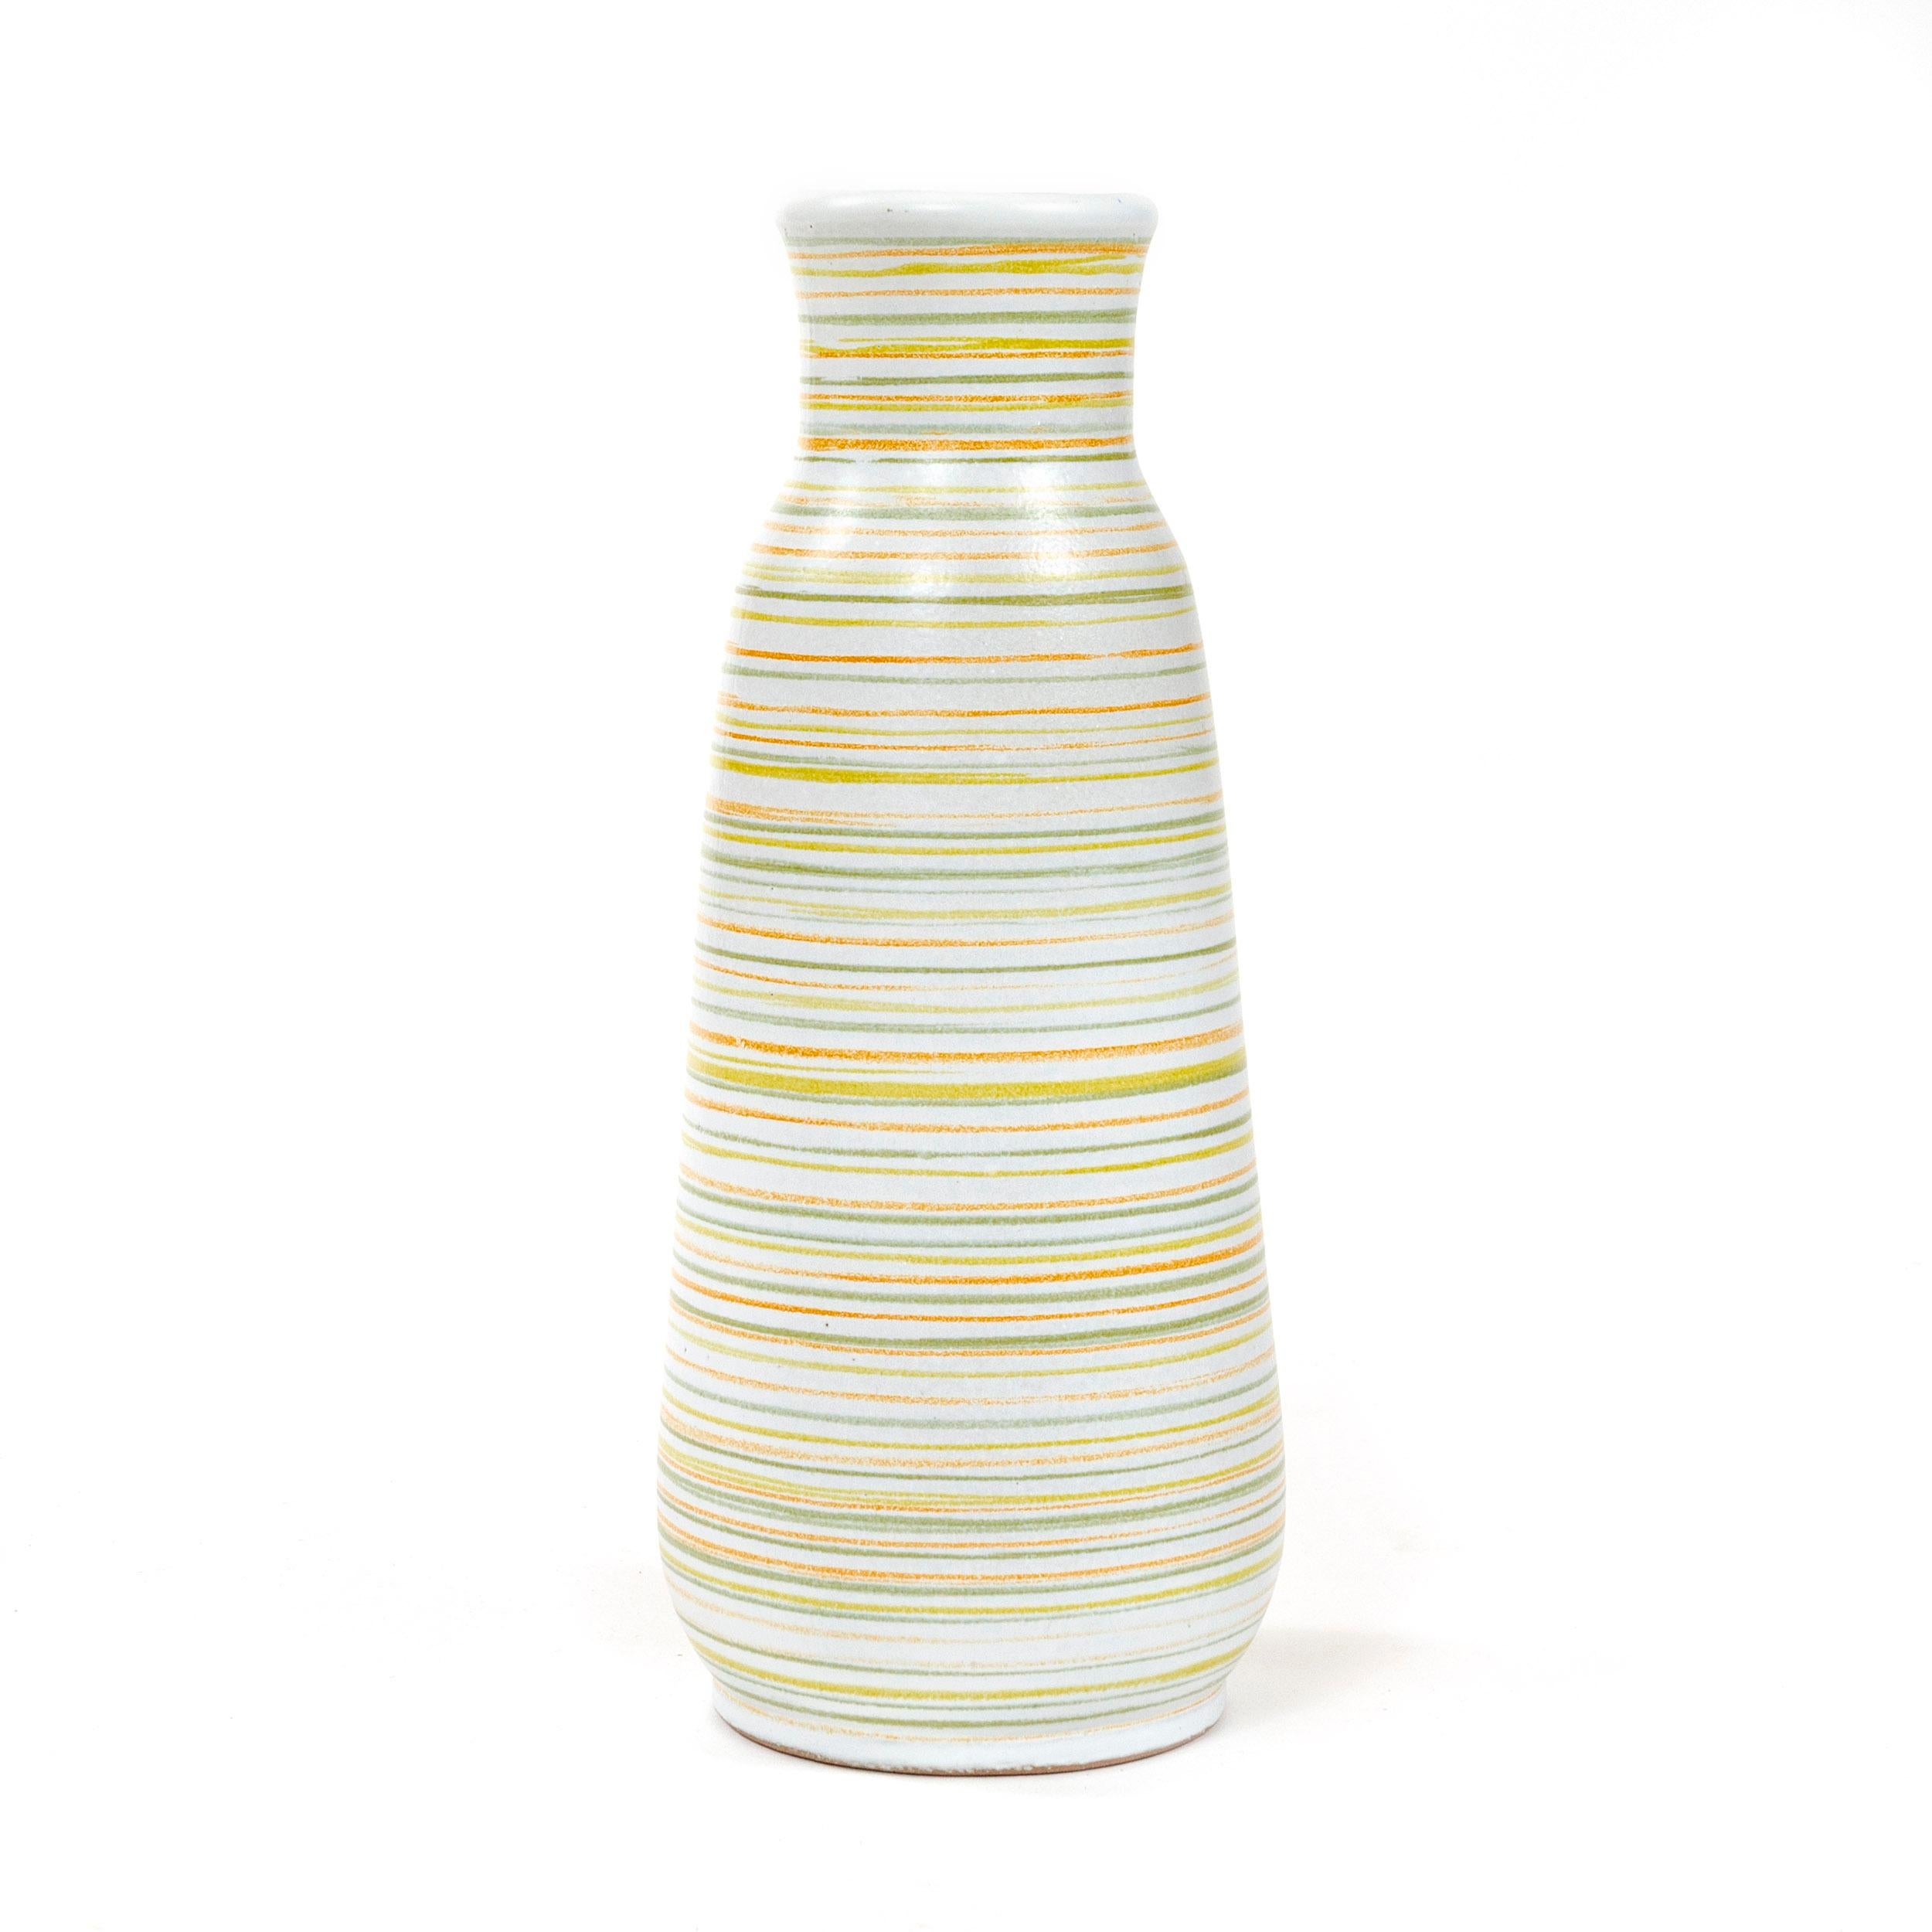 An uncommon small ceramic vase with multicolored stripes. Signed on the underside as depicted.